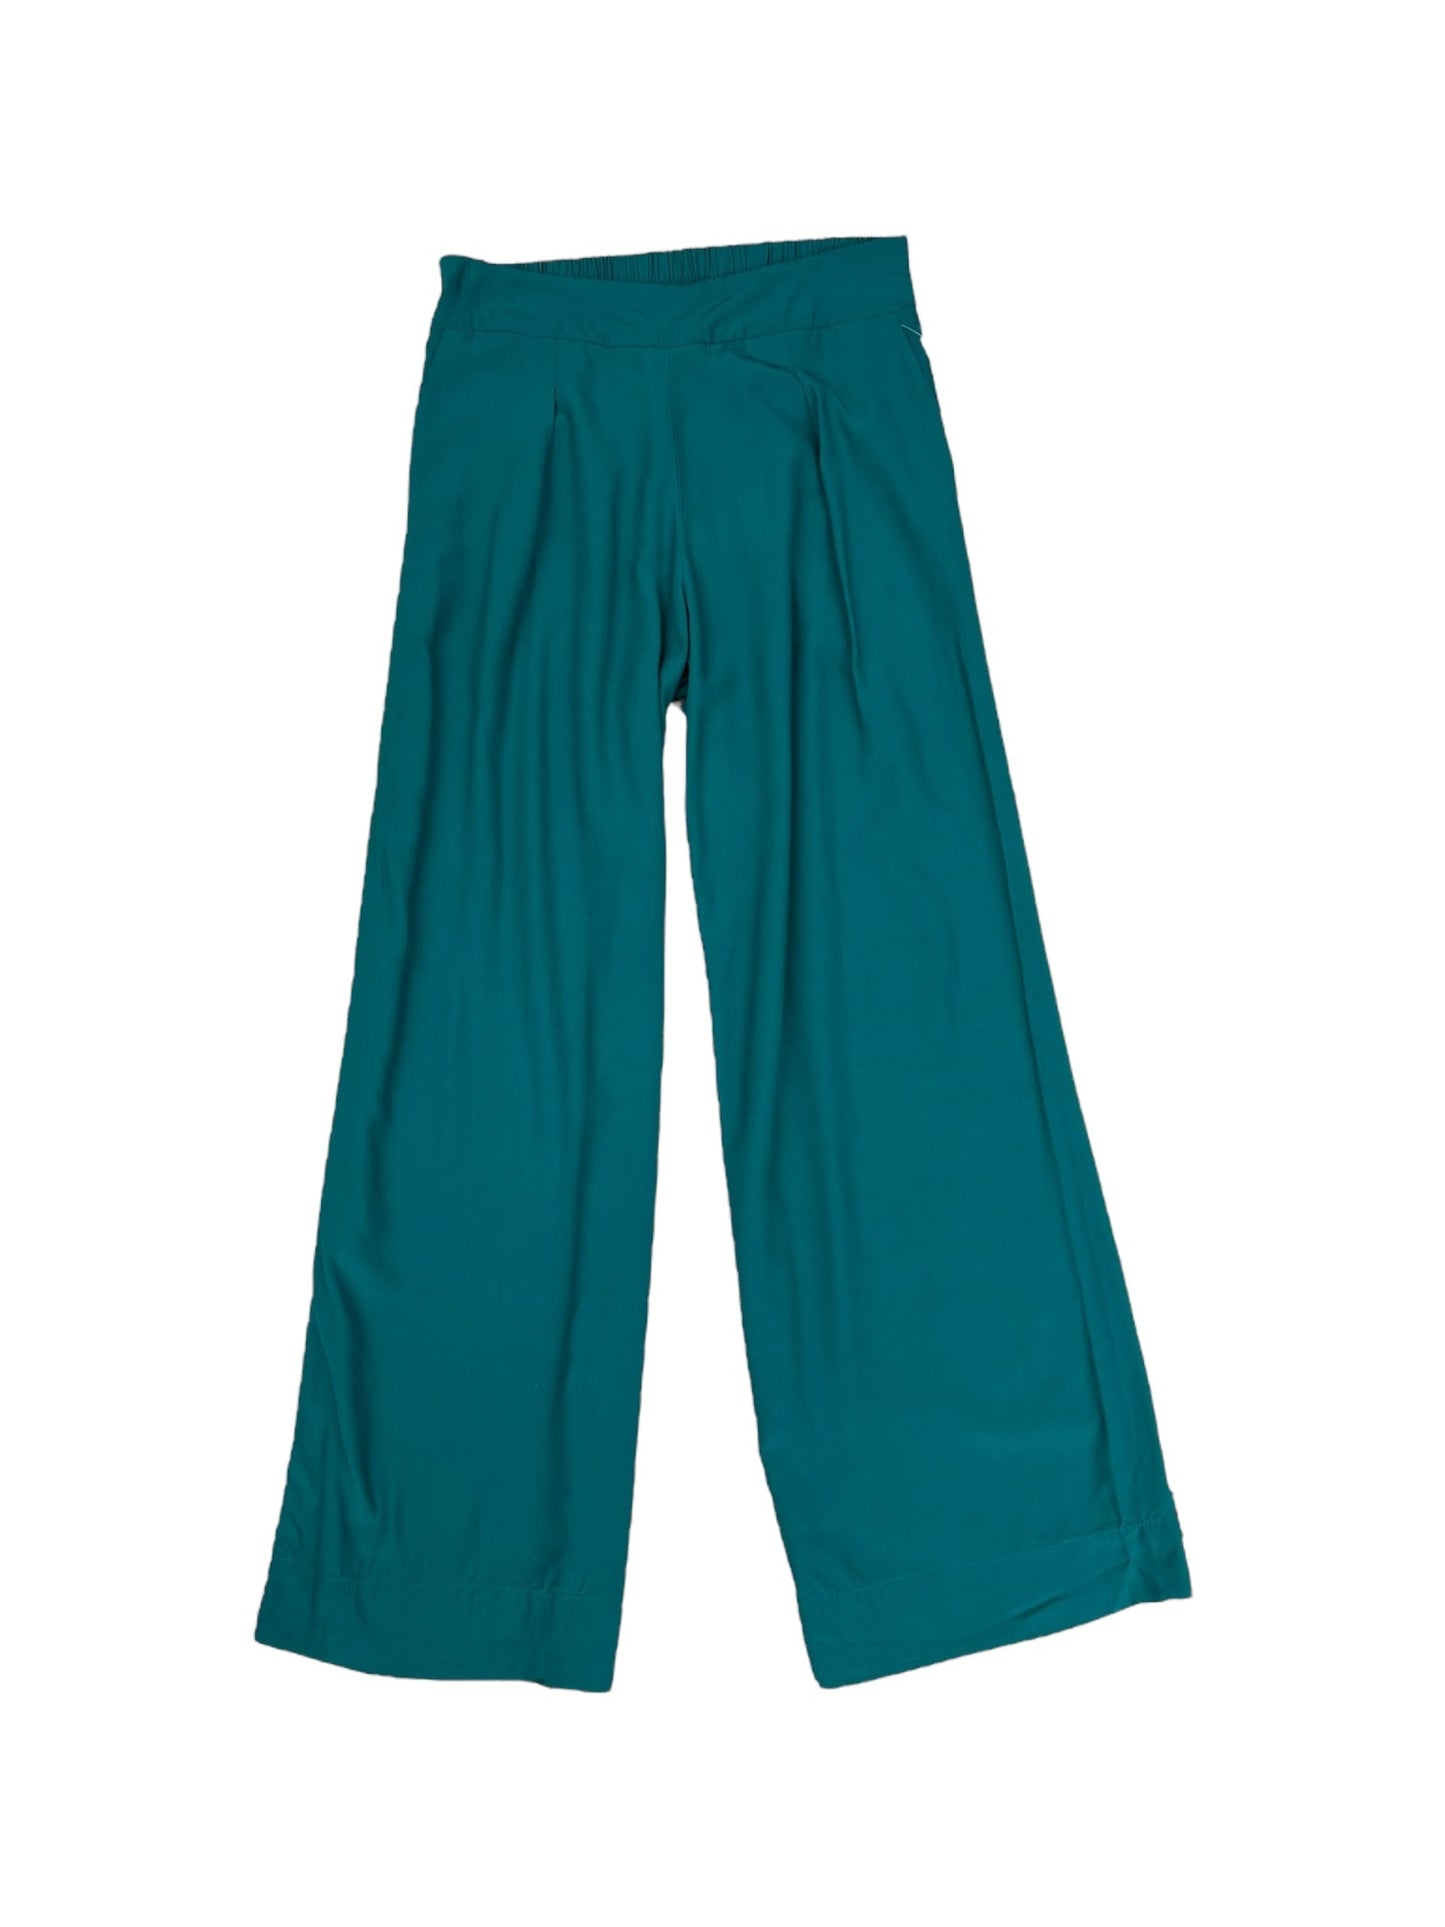 Green Pants Lounge A New Day, Size S